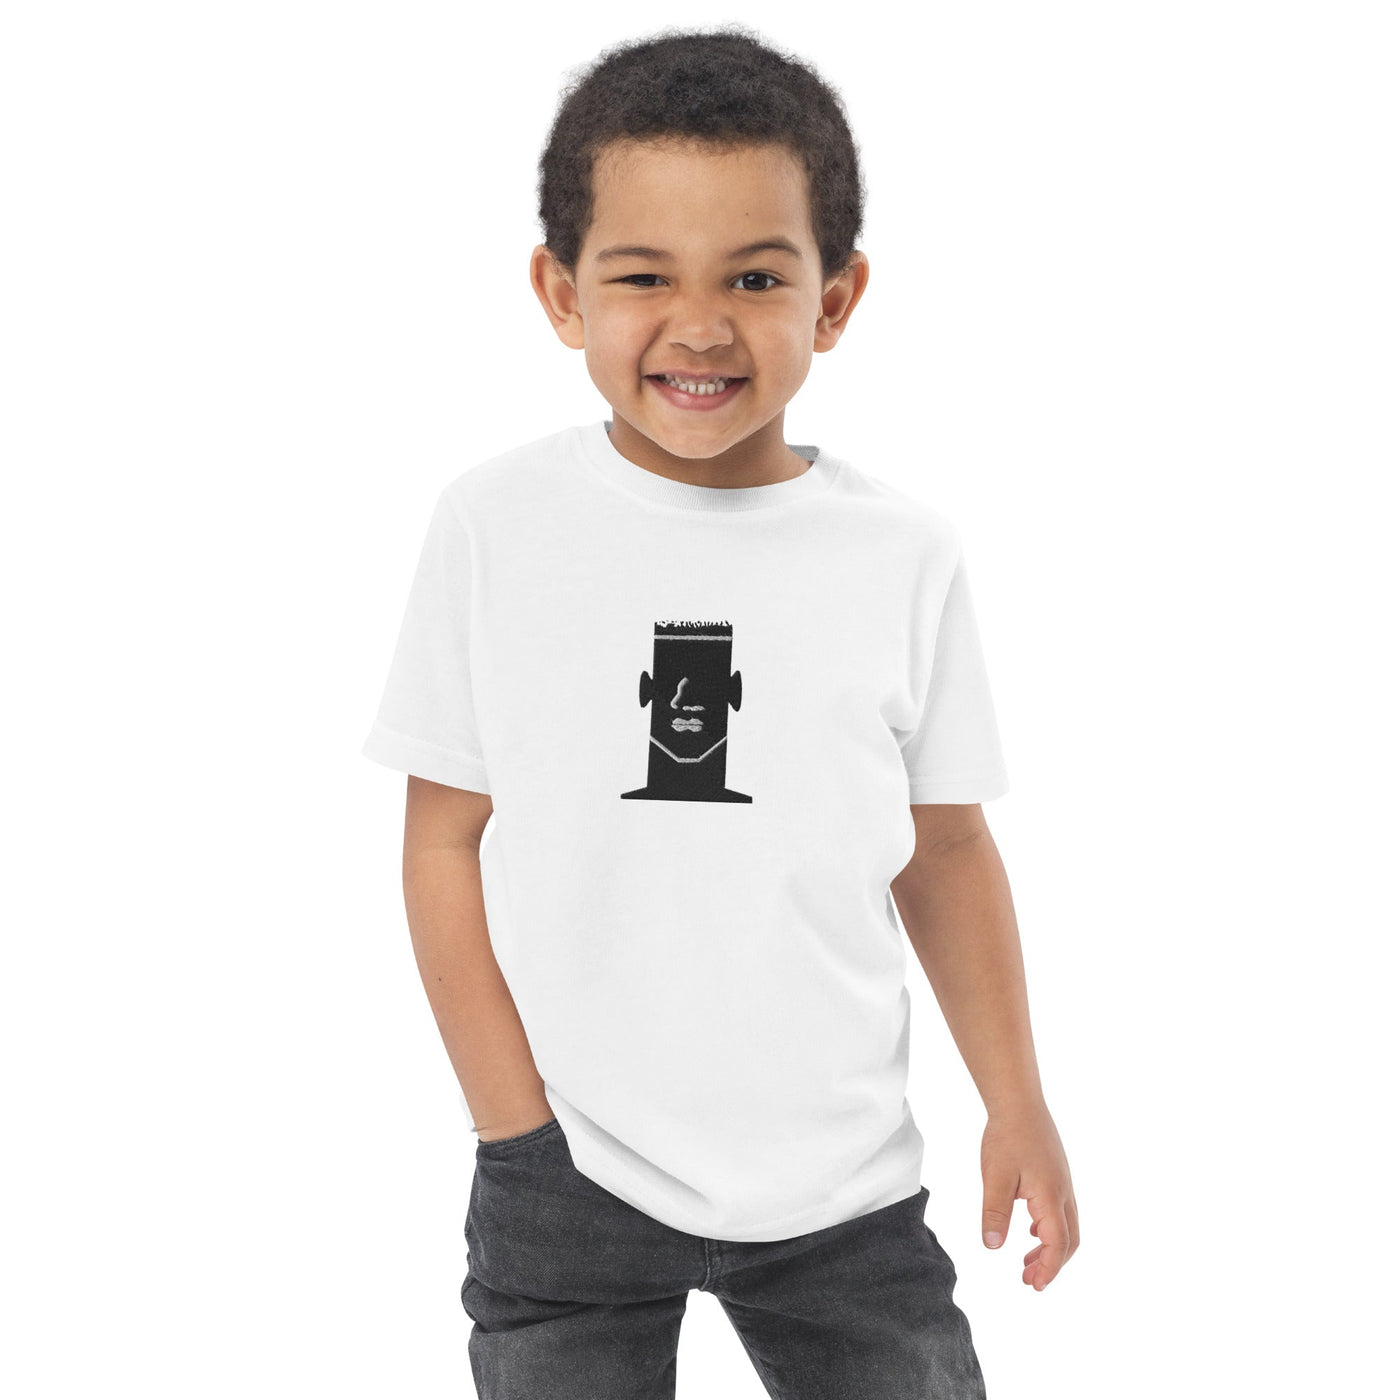 Know Your Heritage Toddler Jersey T-Shirt